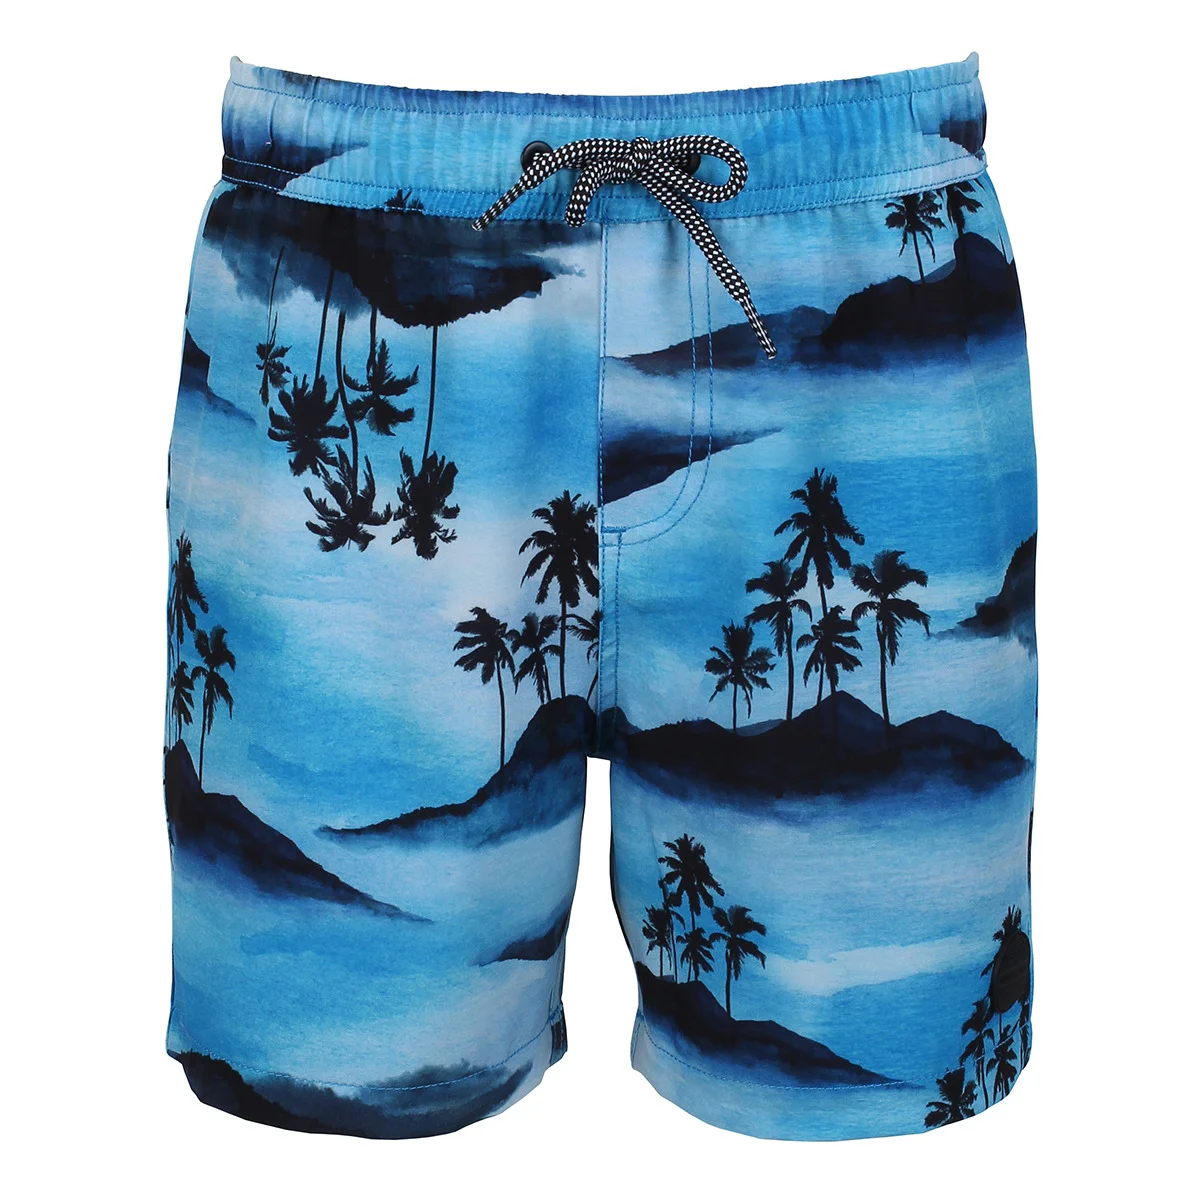 Wholesale Boys Board Shorts Manufacturer Supplier In Bangladesh Factory